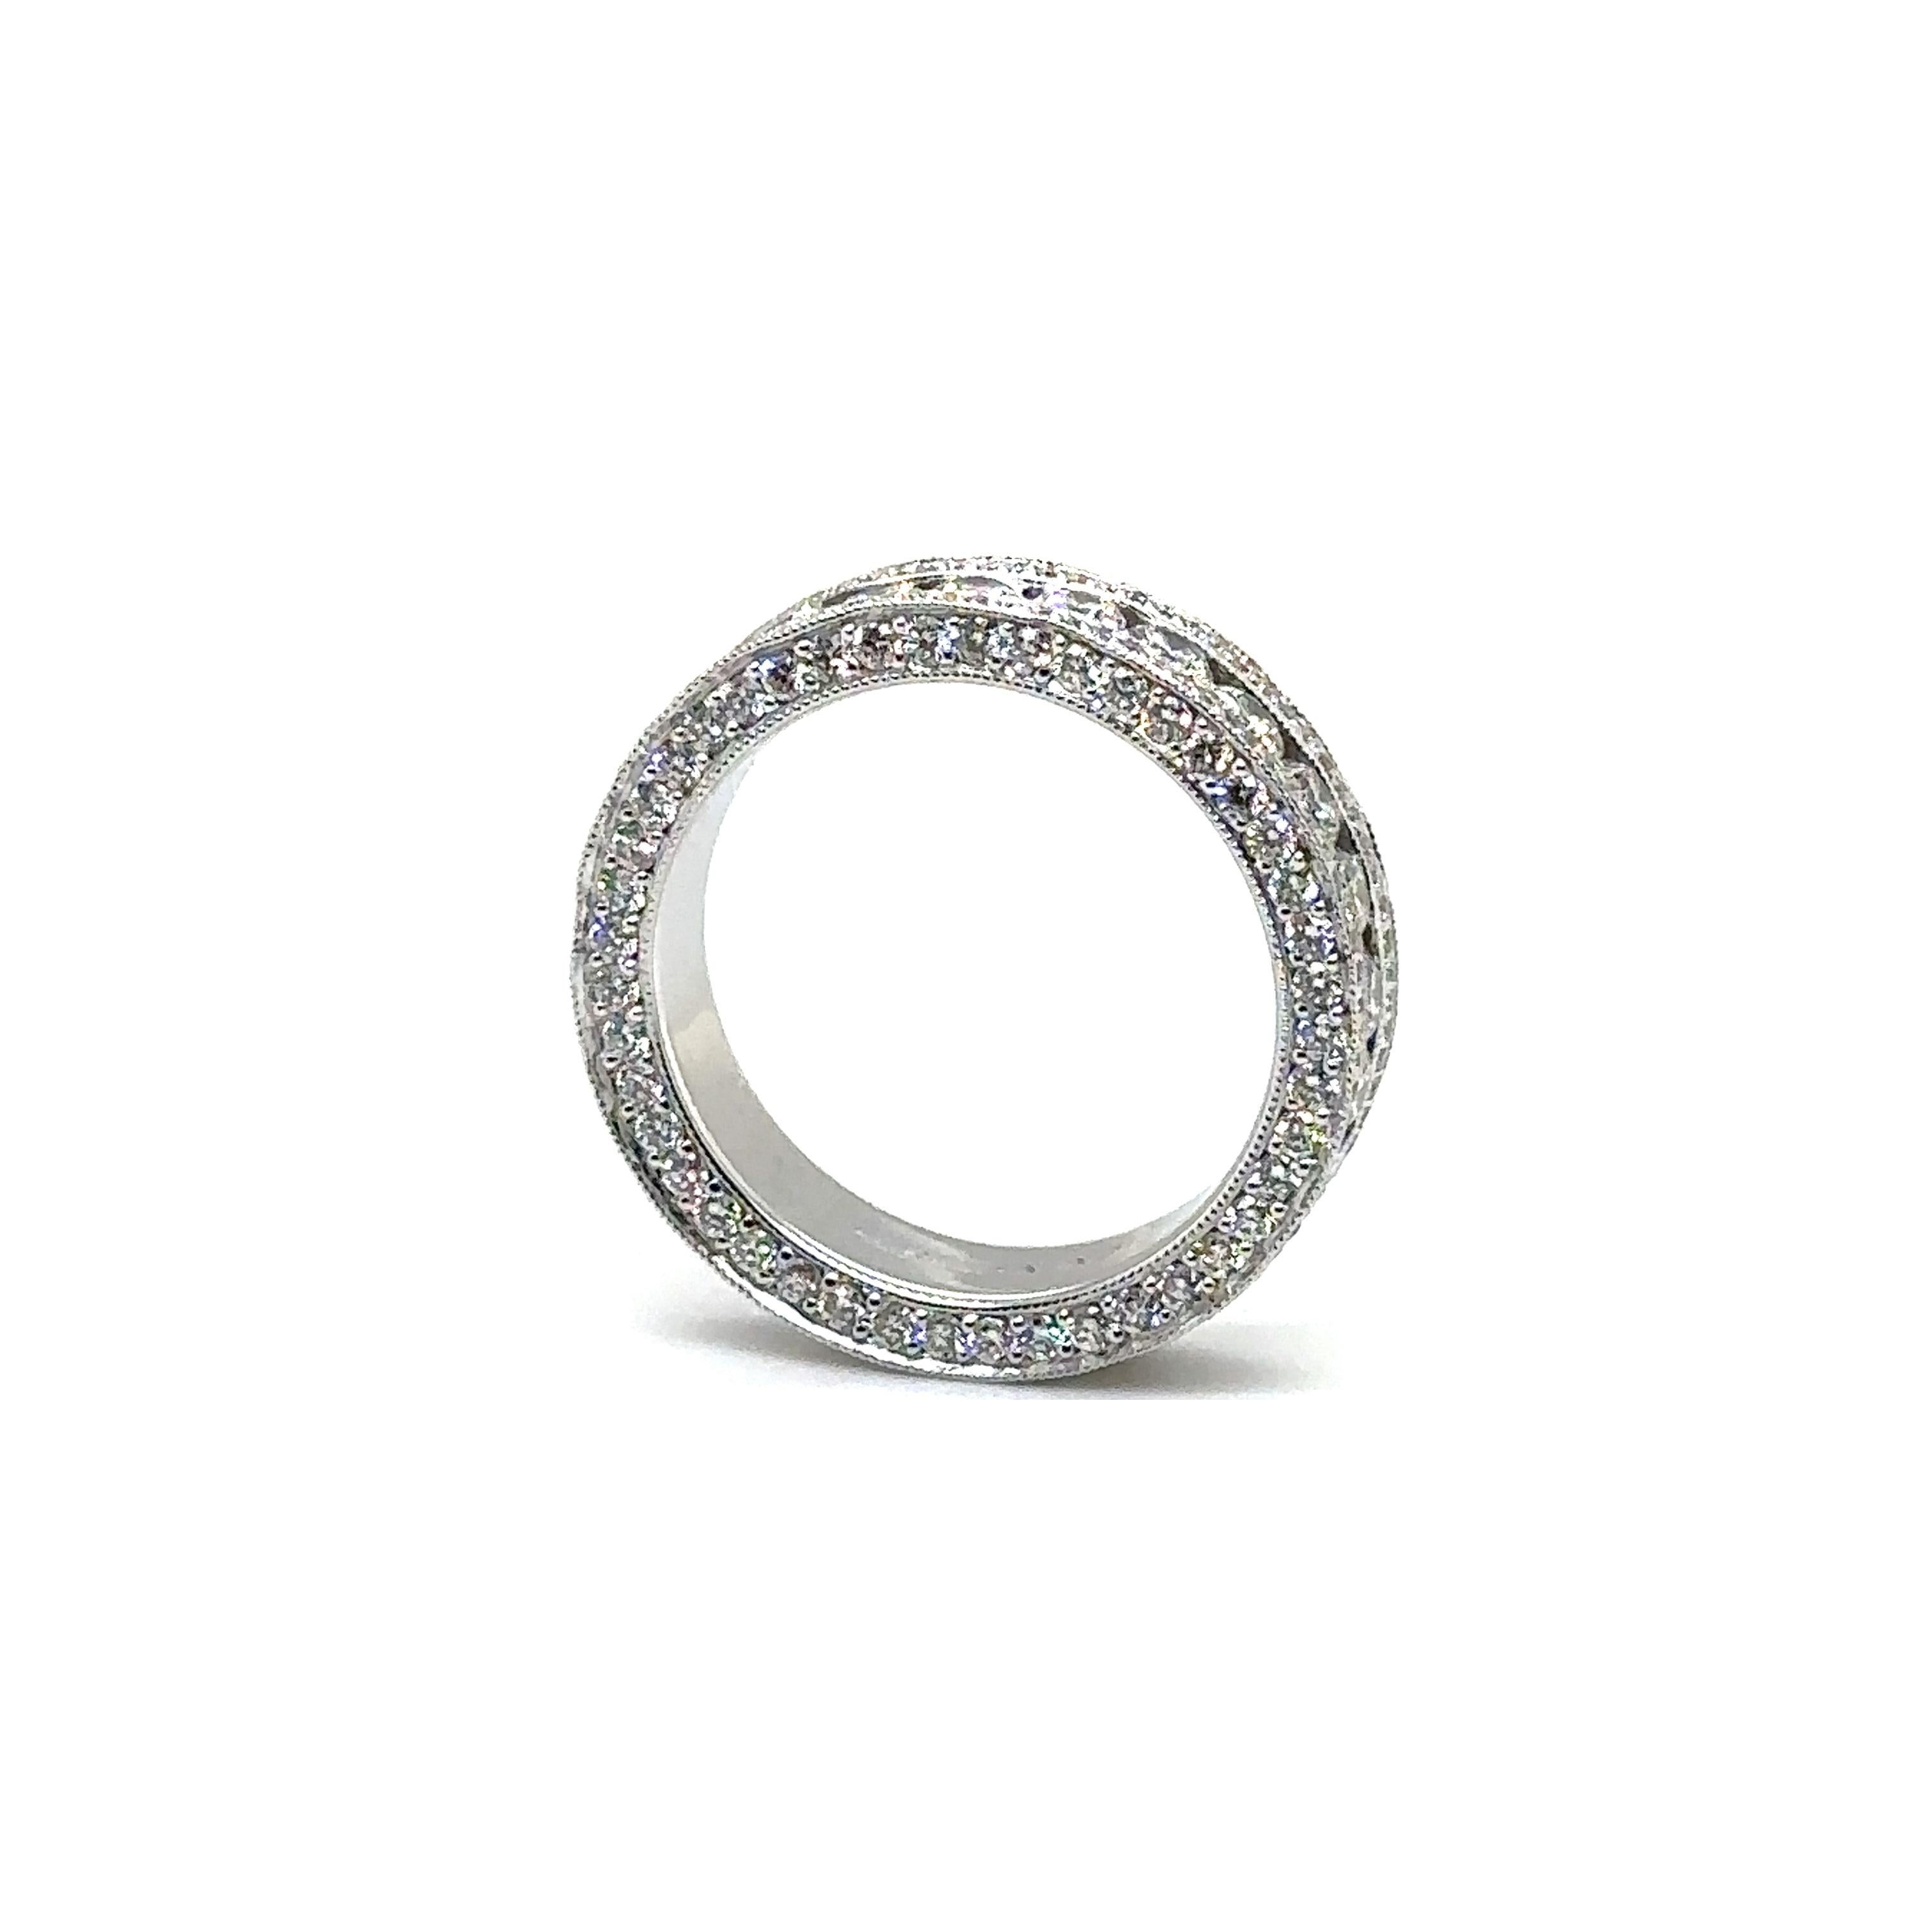 18K White Gold Wedding Ring with Diamond

Metal: 18K White Gold
Diamond Info: 
G/H VS, 271 Brilliant Round Diamonds 3.06 CWT. 
Total Ct Weight:  3.06 CWT.
Item Weight: 6.95 gm
Ring Size:   6.25 (Not Re-sizable)
Measurements:  5.3 mm
